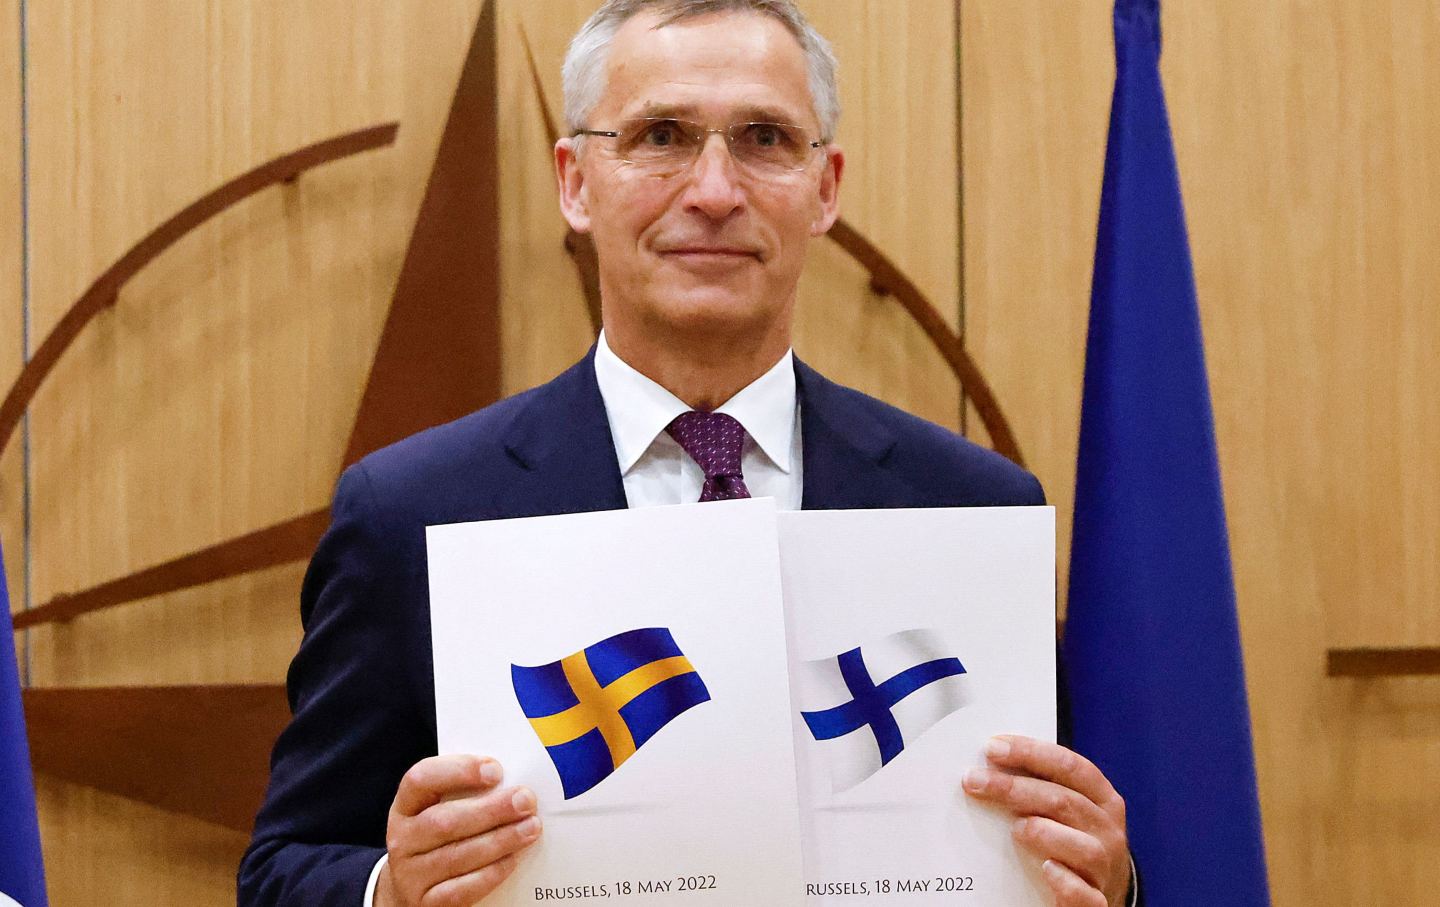 NATO Secretary General holds images of Sweden's and Finland's flags.